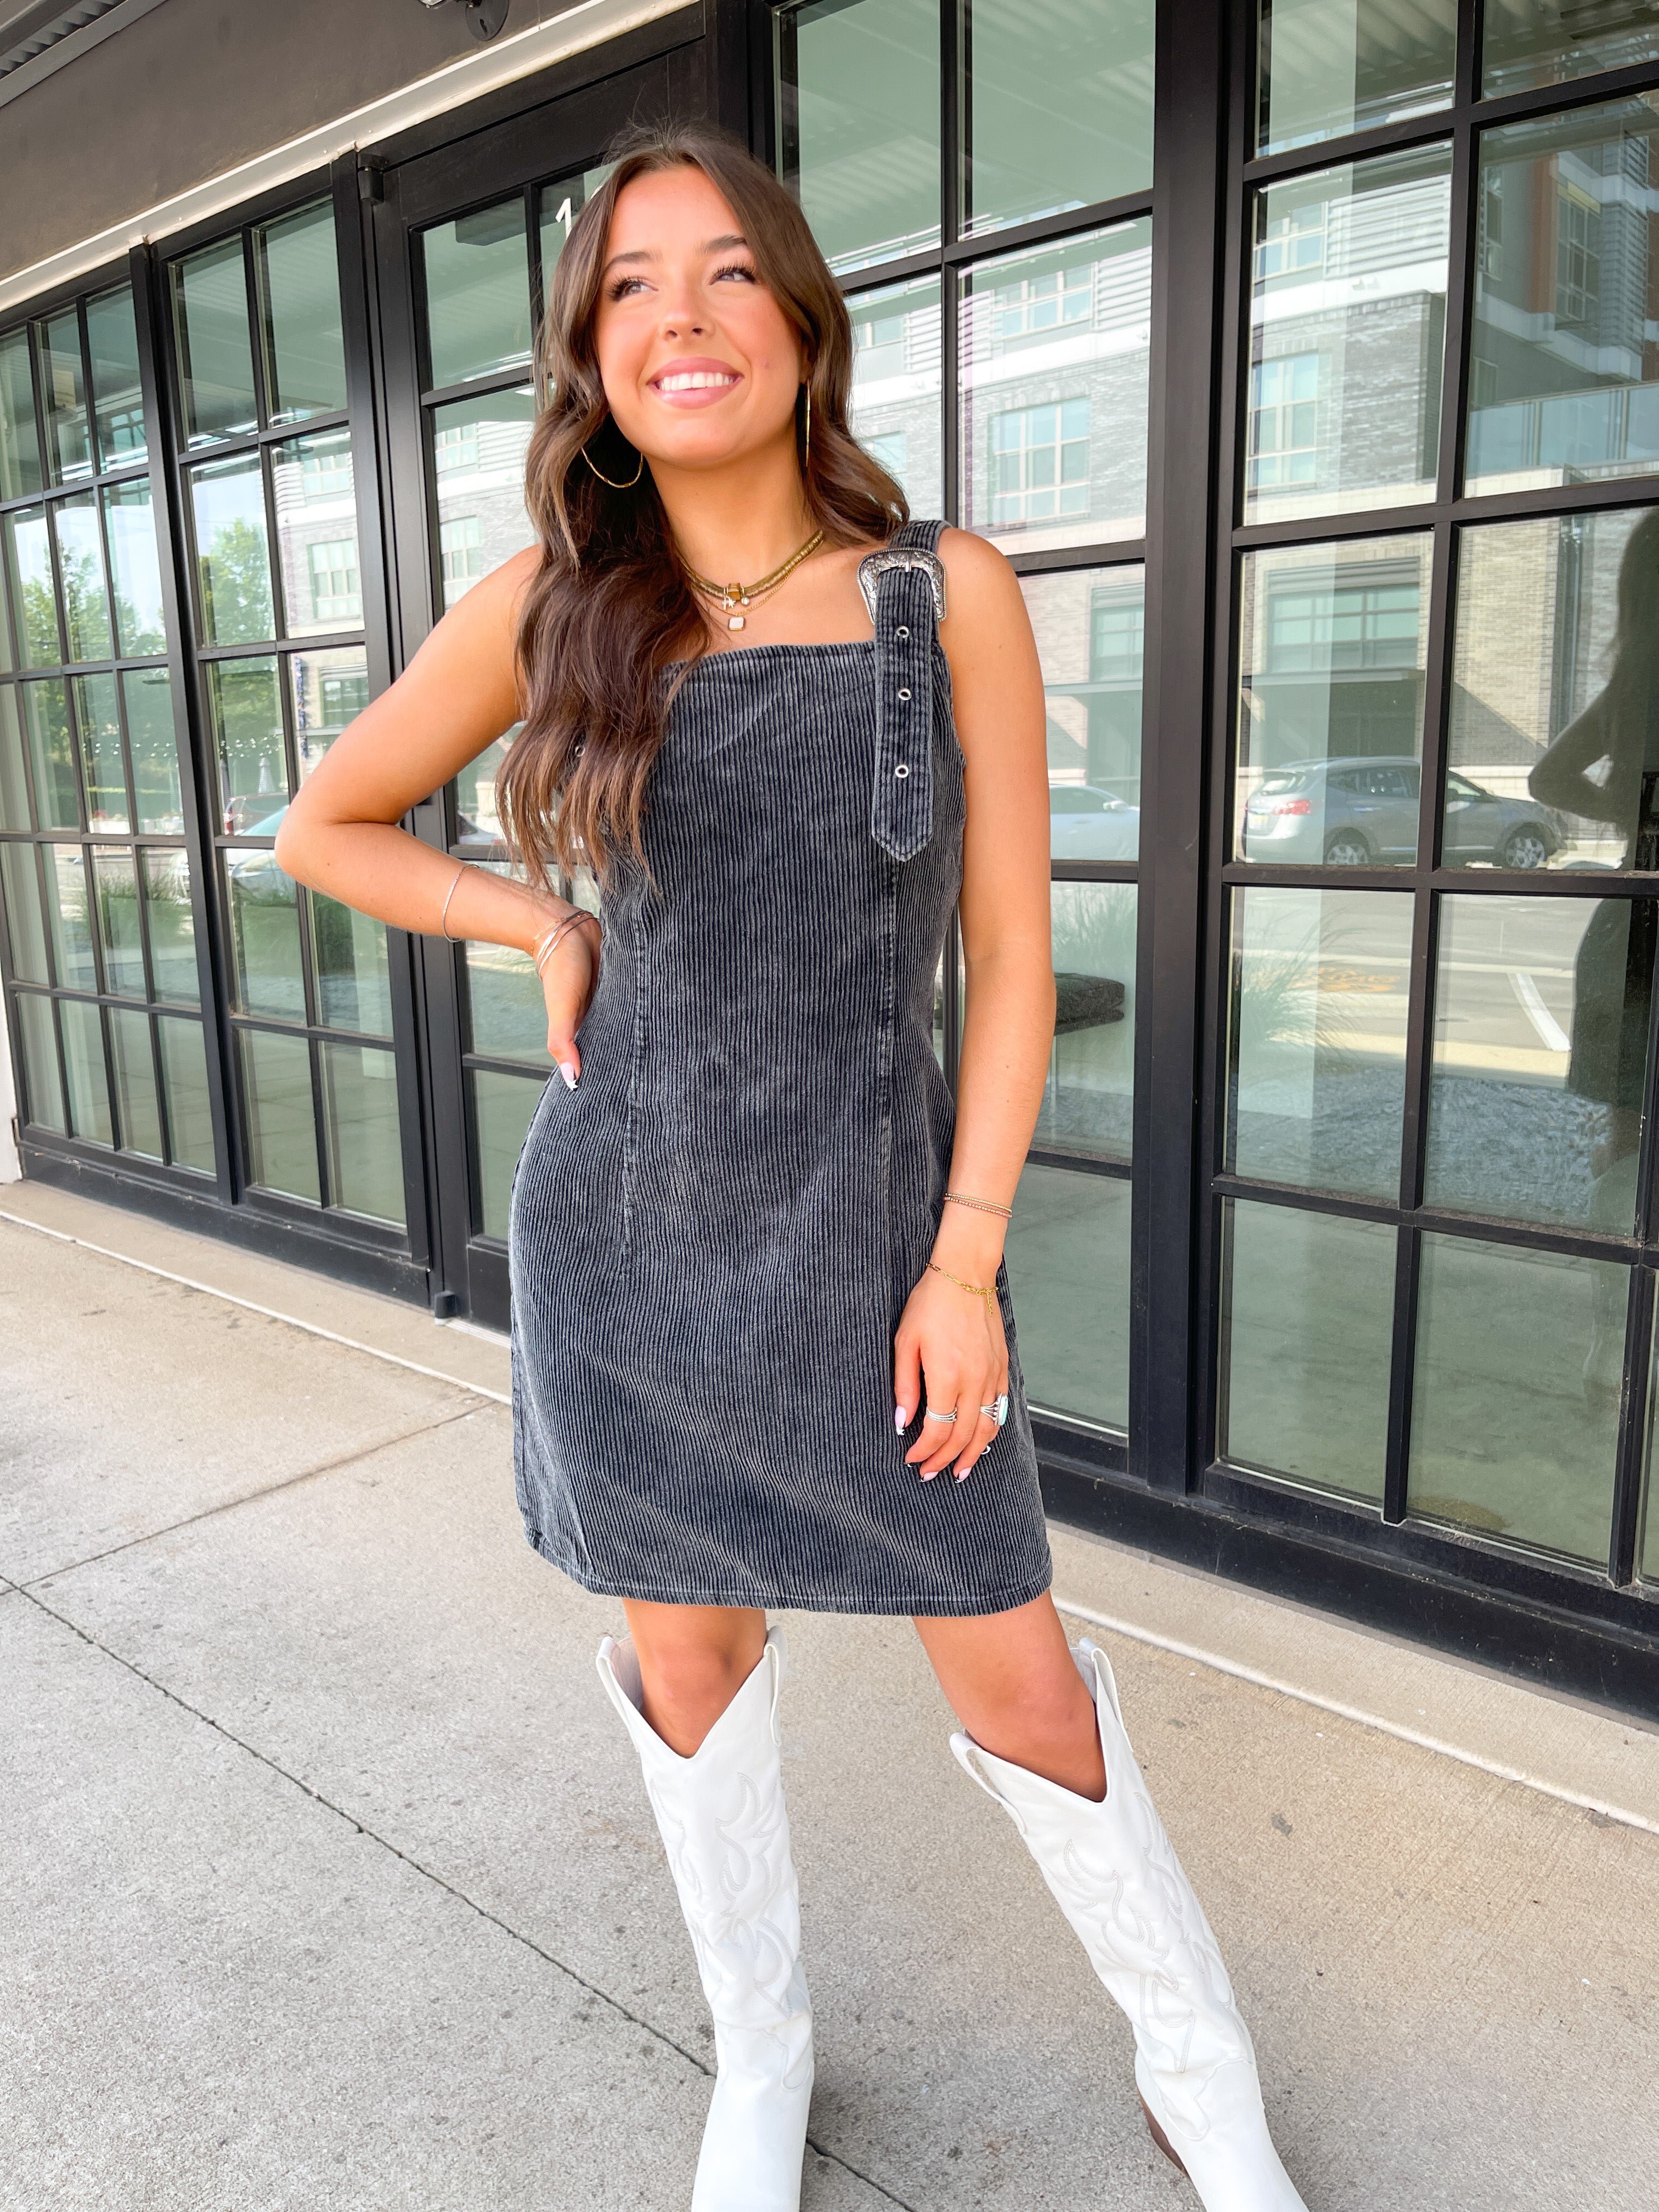 jumper dress and boots